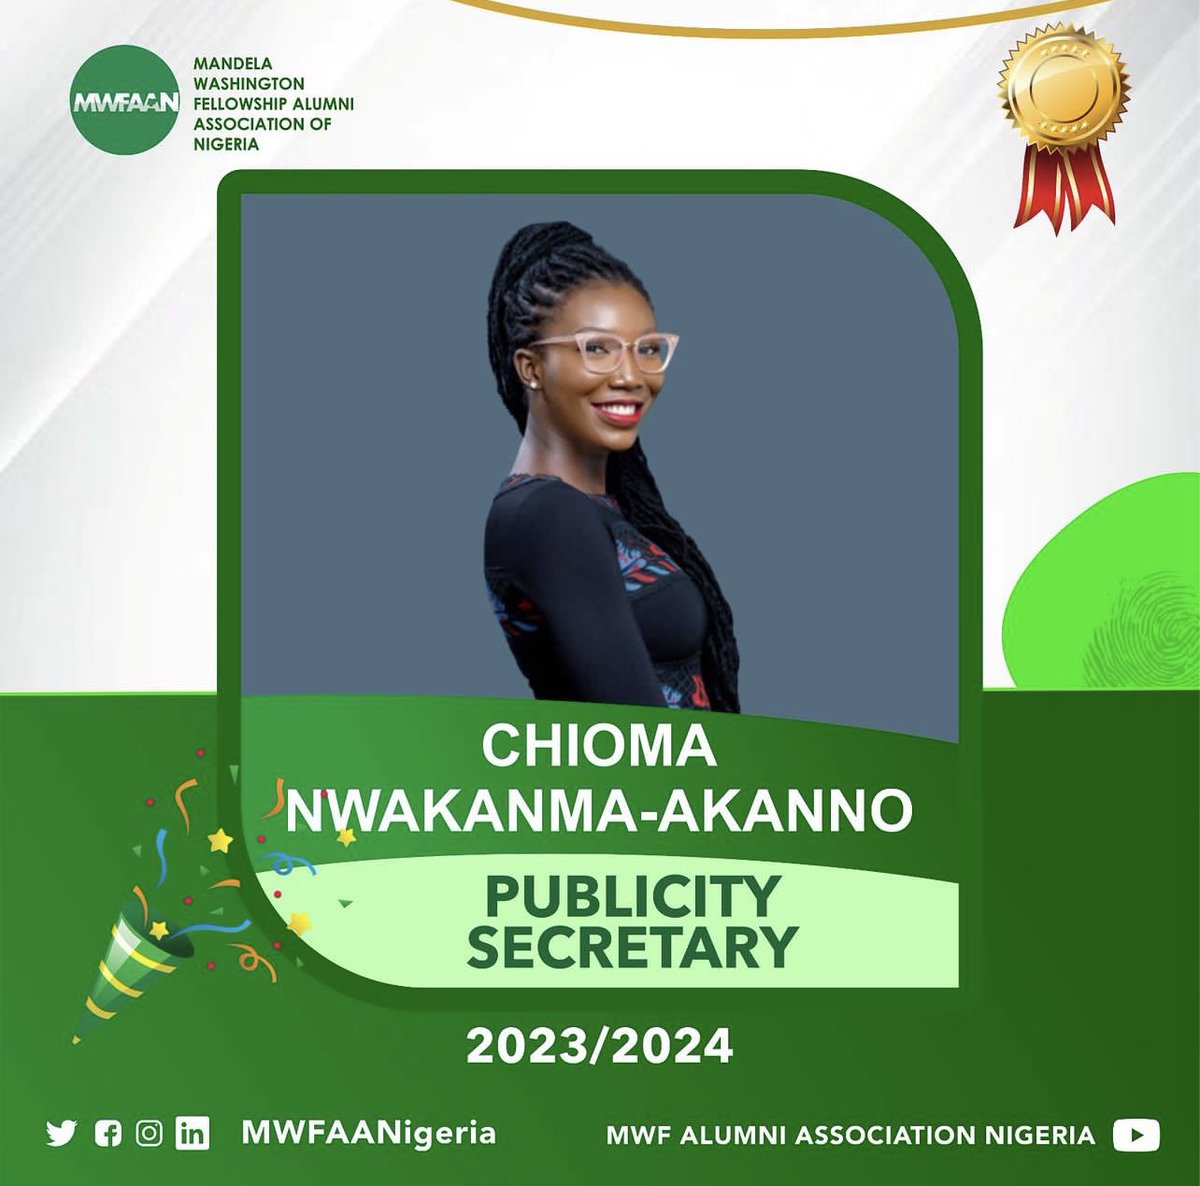 And so the journey begins 🎉
Week 2 of 52. 
Serving the most powerful organization of influential youth in Nigeria, Africa.

Thank you @USinNigeria @IREXintl and @WashFellowship for this platform.

Yours in Service
Madam Publicity Secretary
@MWFAANigeria 
2023/2024
#MandelaFellow